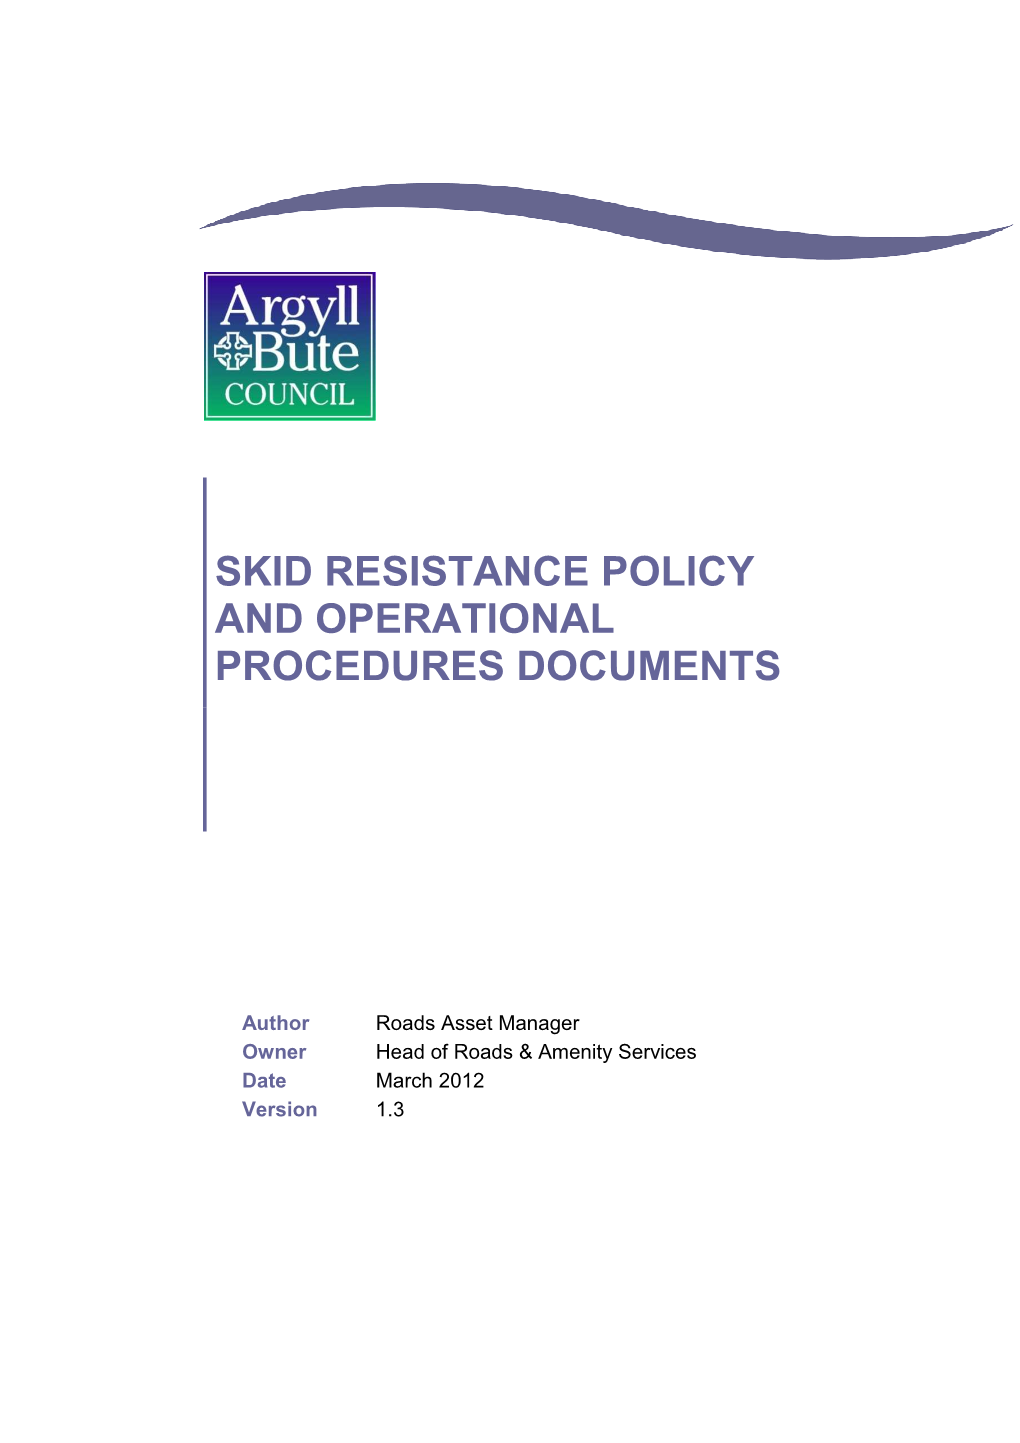 Skid Resistance Policy and Operational Procedures